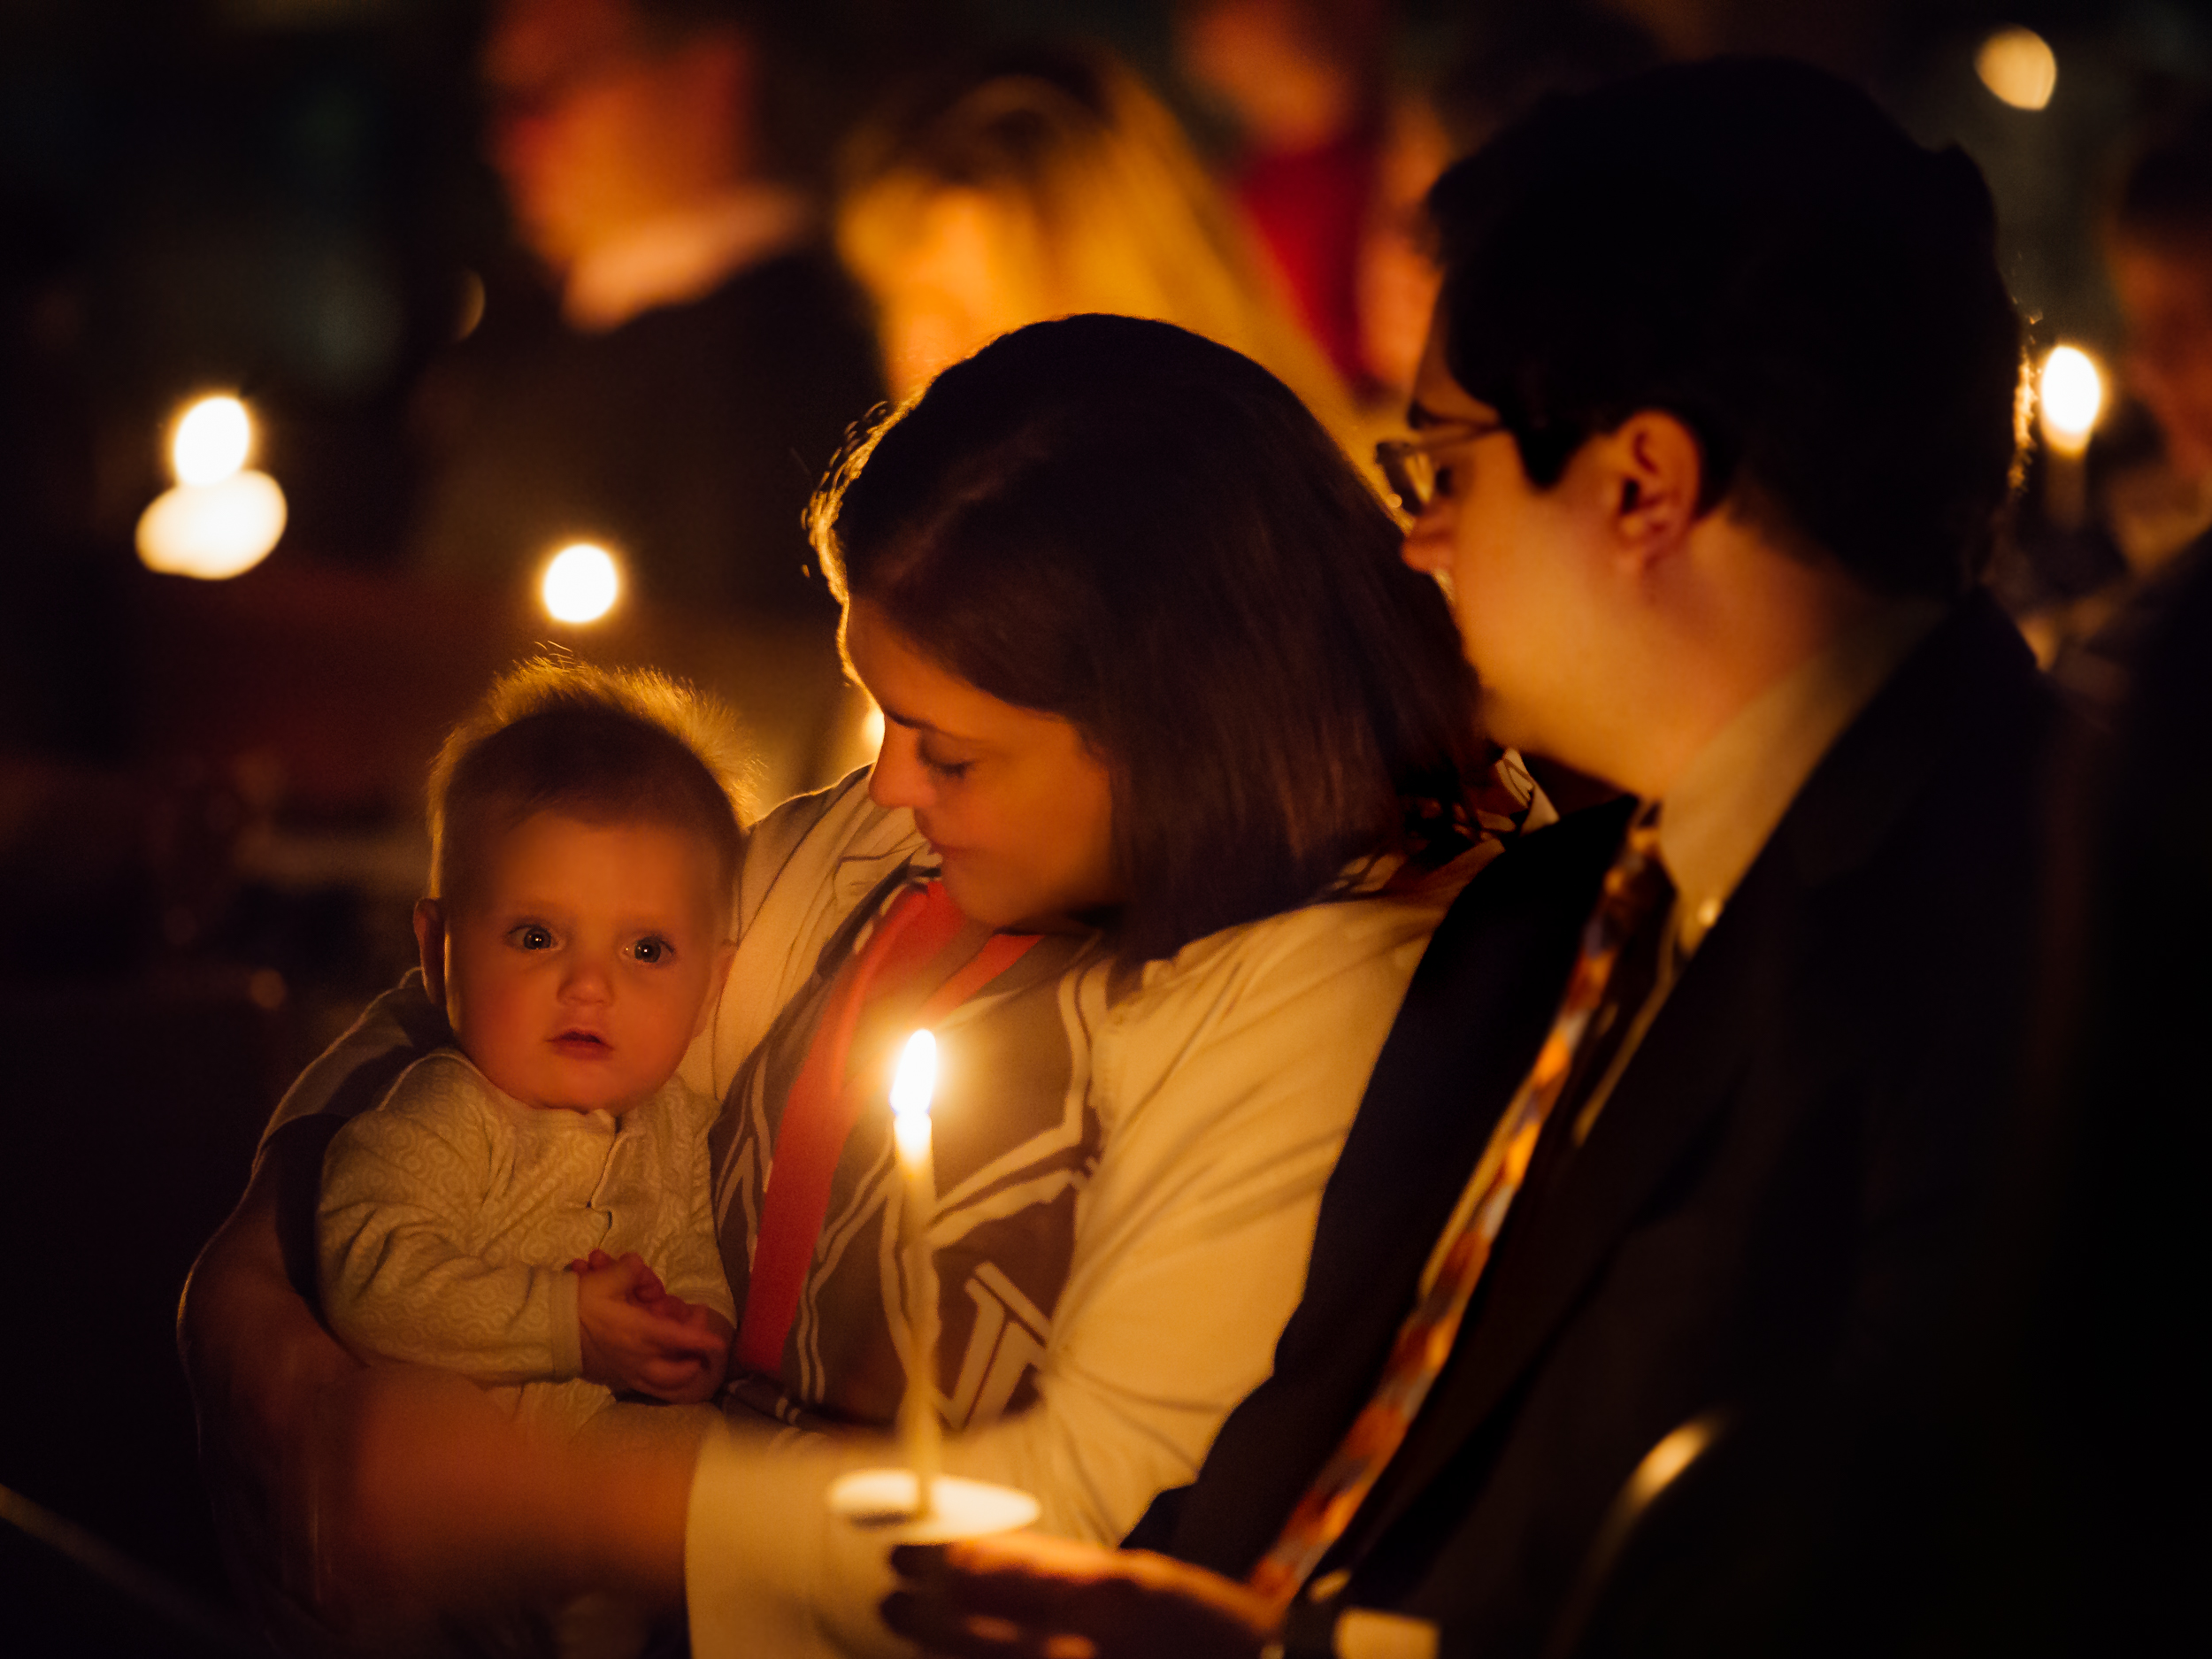 Seattle, St. Paul's Episcopal Church with candle light